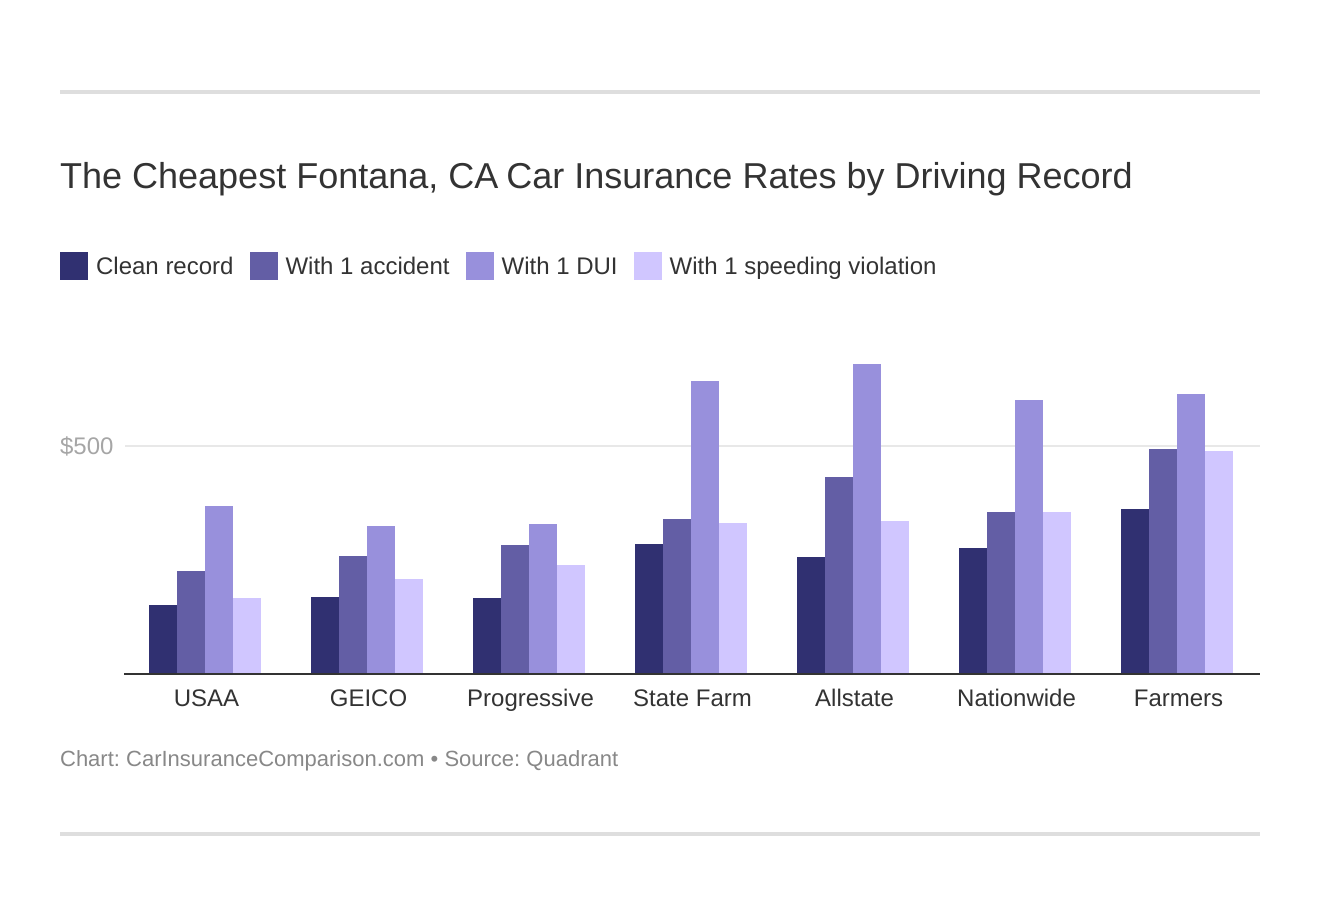 The Cheapest Fontana, CA Car Insurance Rates by Driving Record